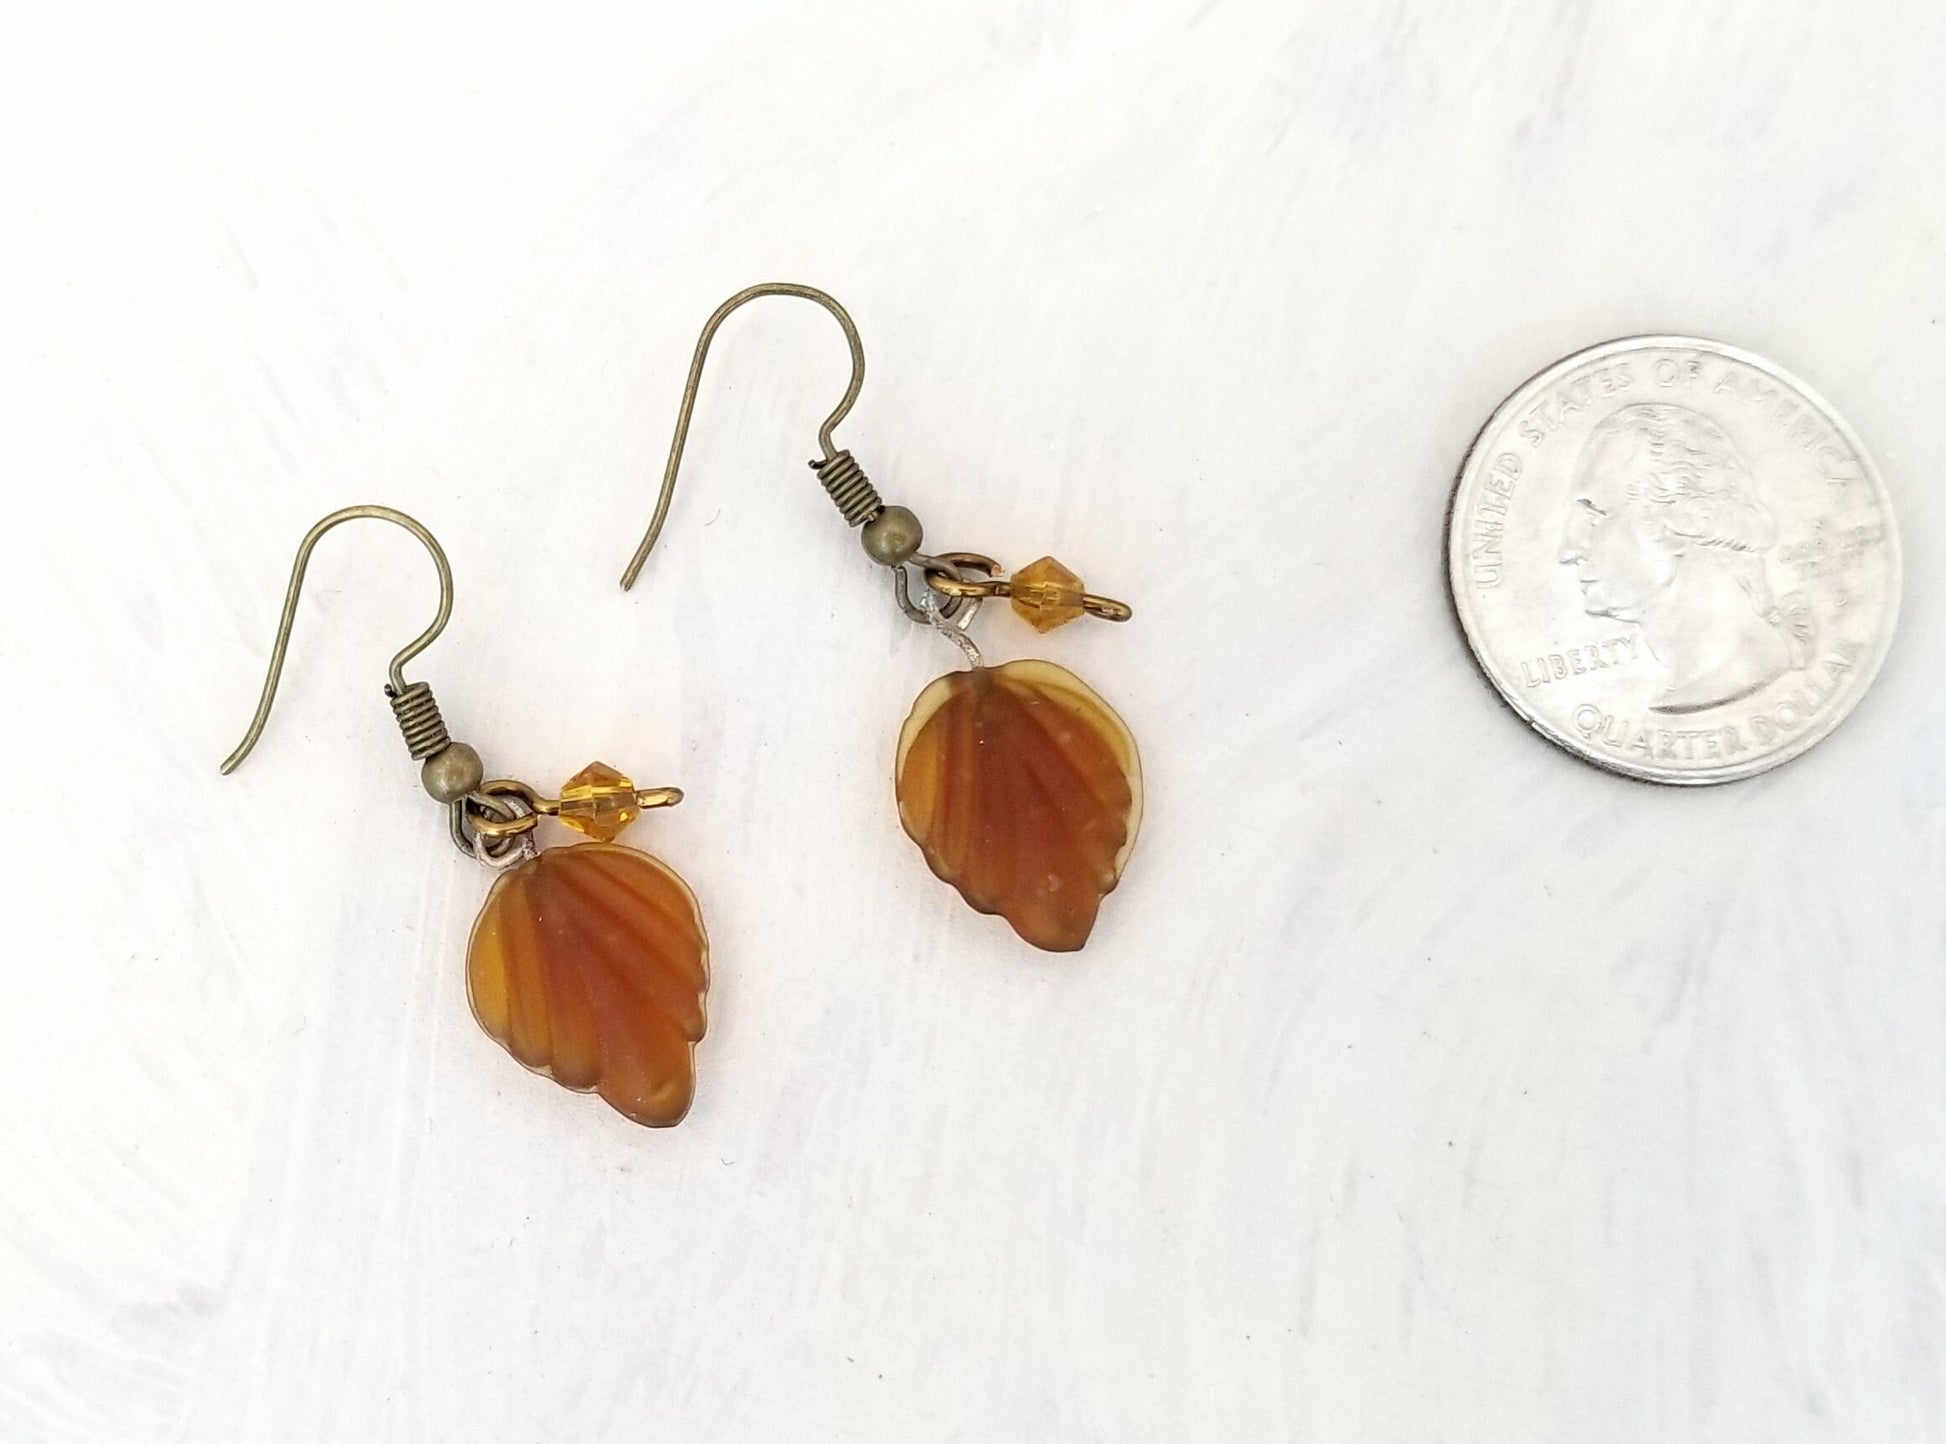 Small Glass Leaf Earrings in Frosted Brown, Wedding, Bridesmaid, Art Nouveau, Belle Époque, Renaissance, Forest, Choice of Closure Types